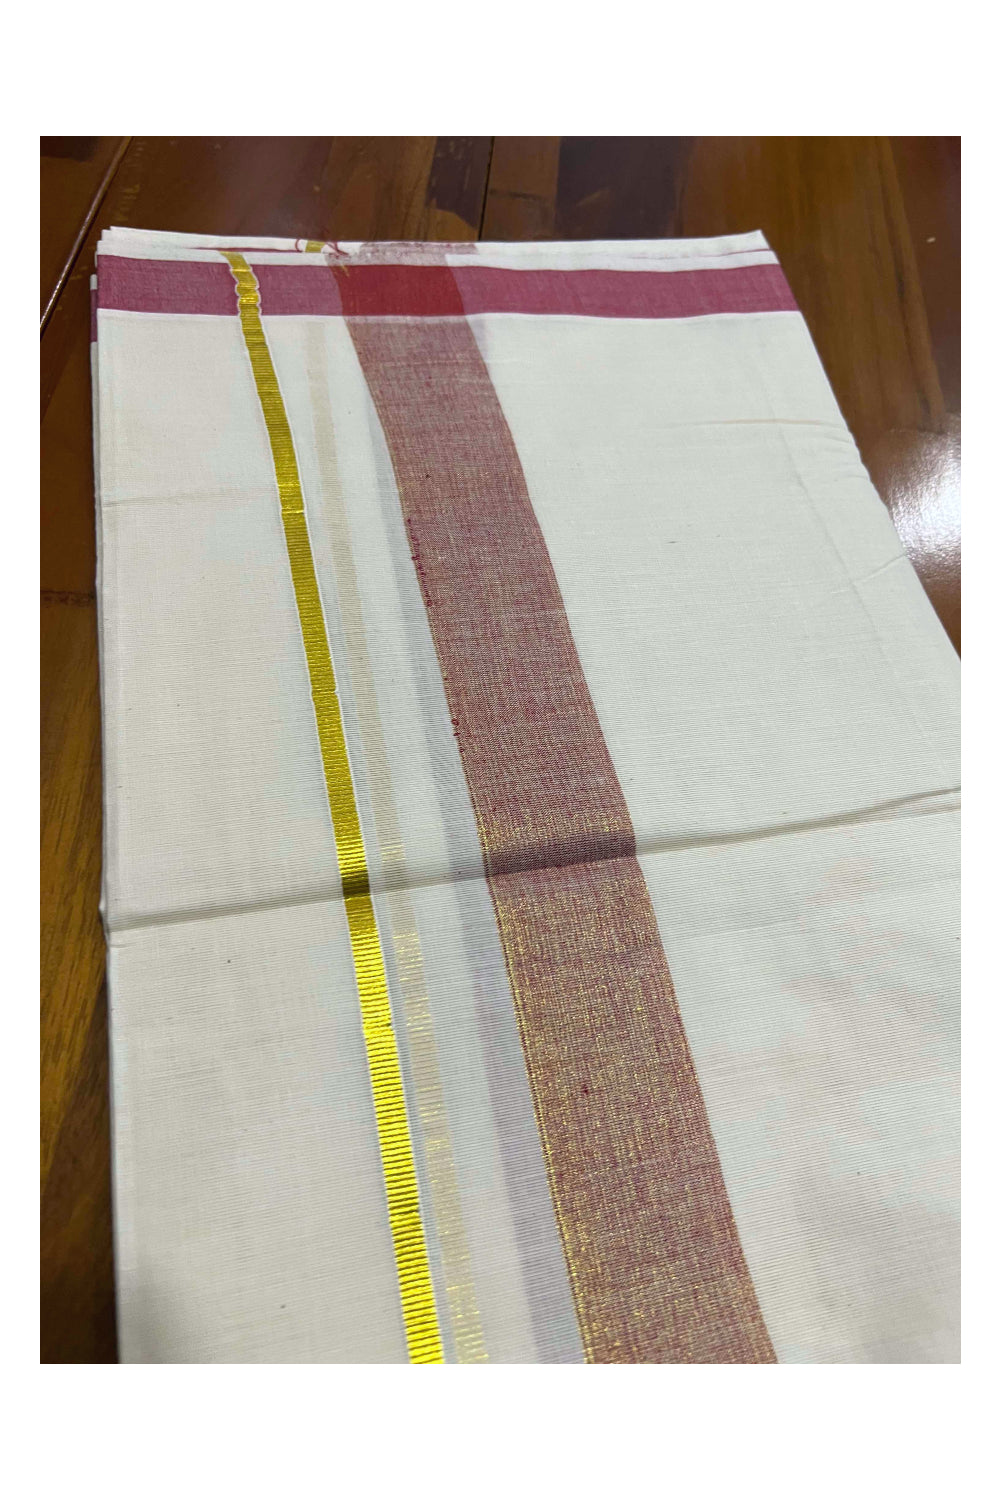 Off White Kerala Double Mundu with Dark Red and Kasavu Line Border (South Indian Dhoti)